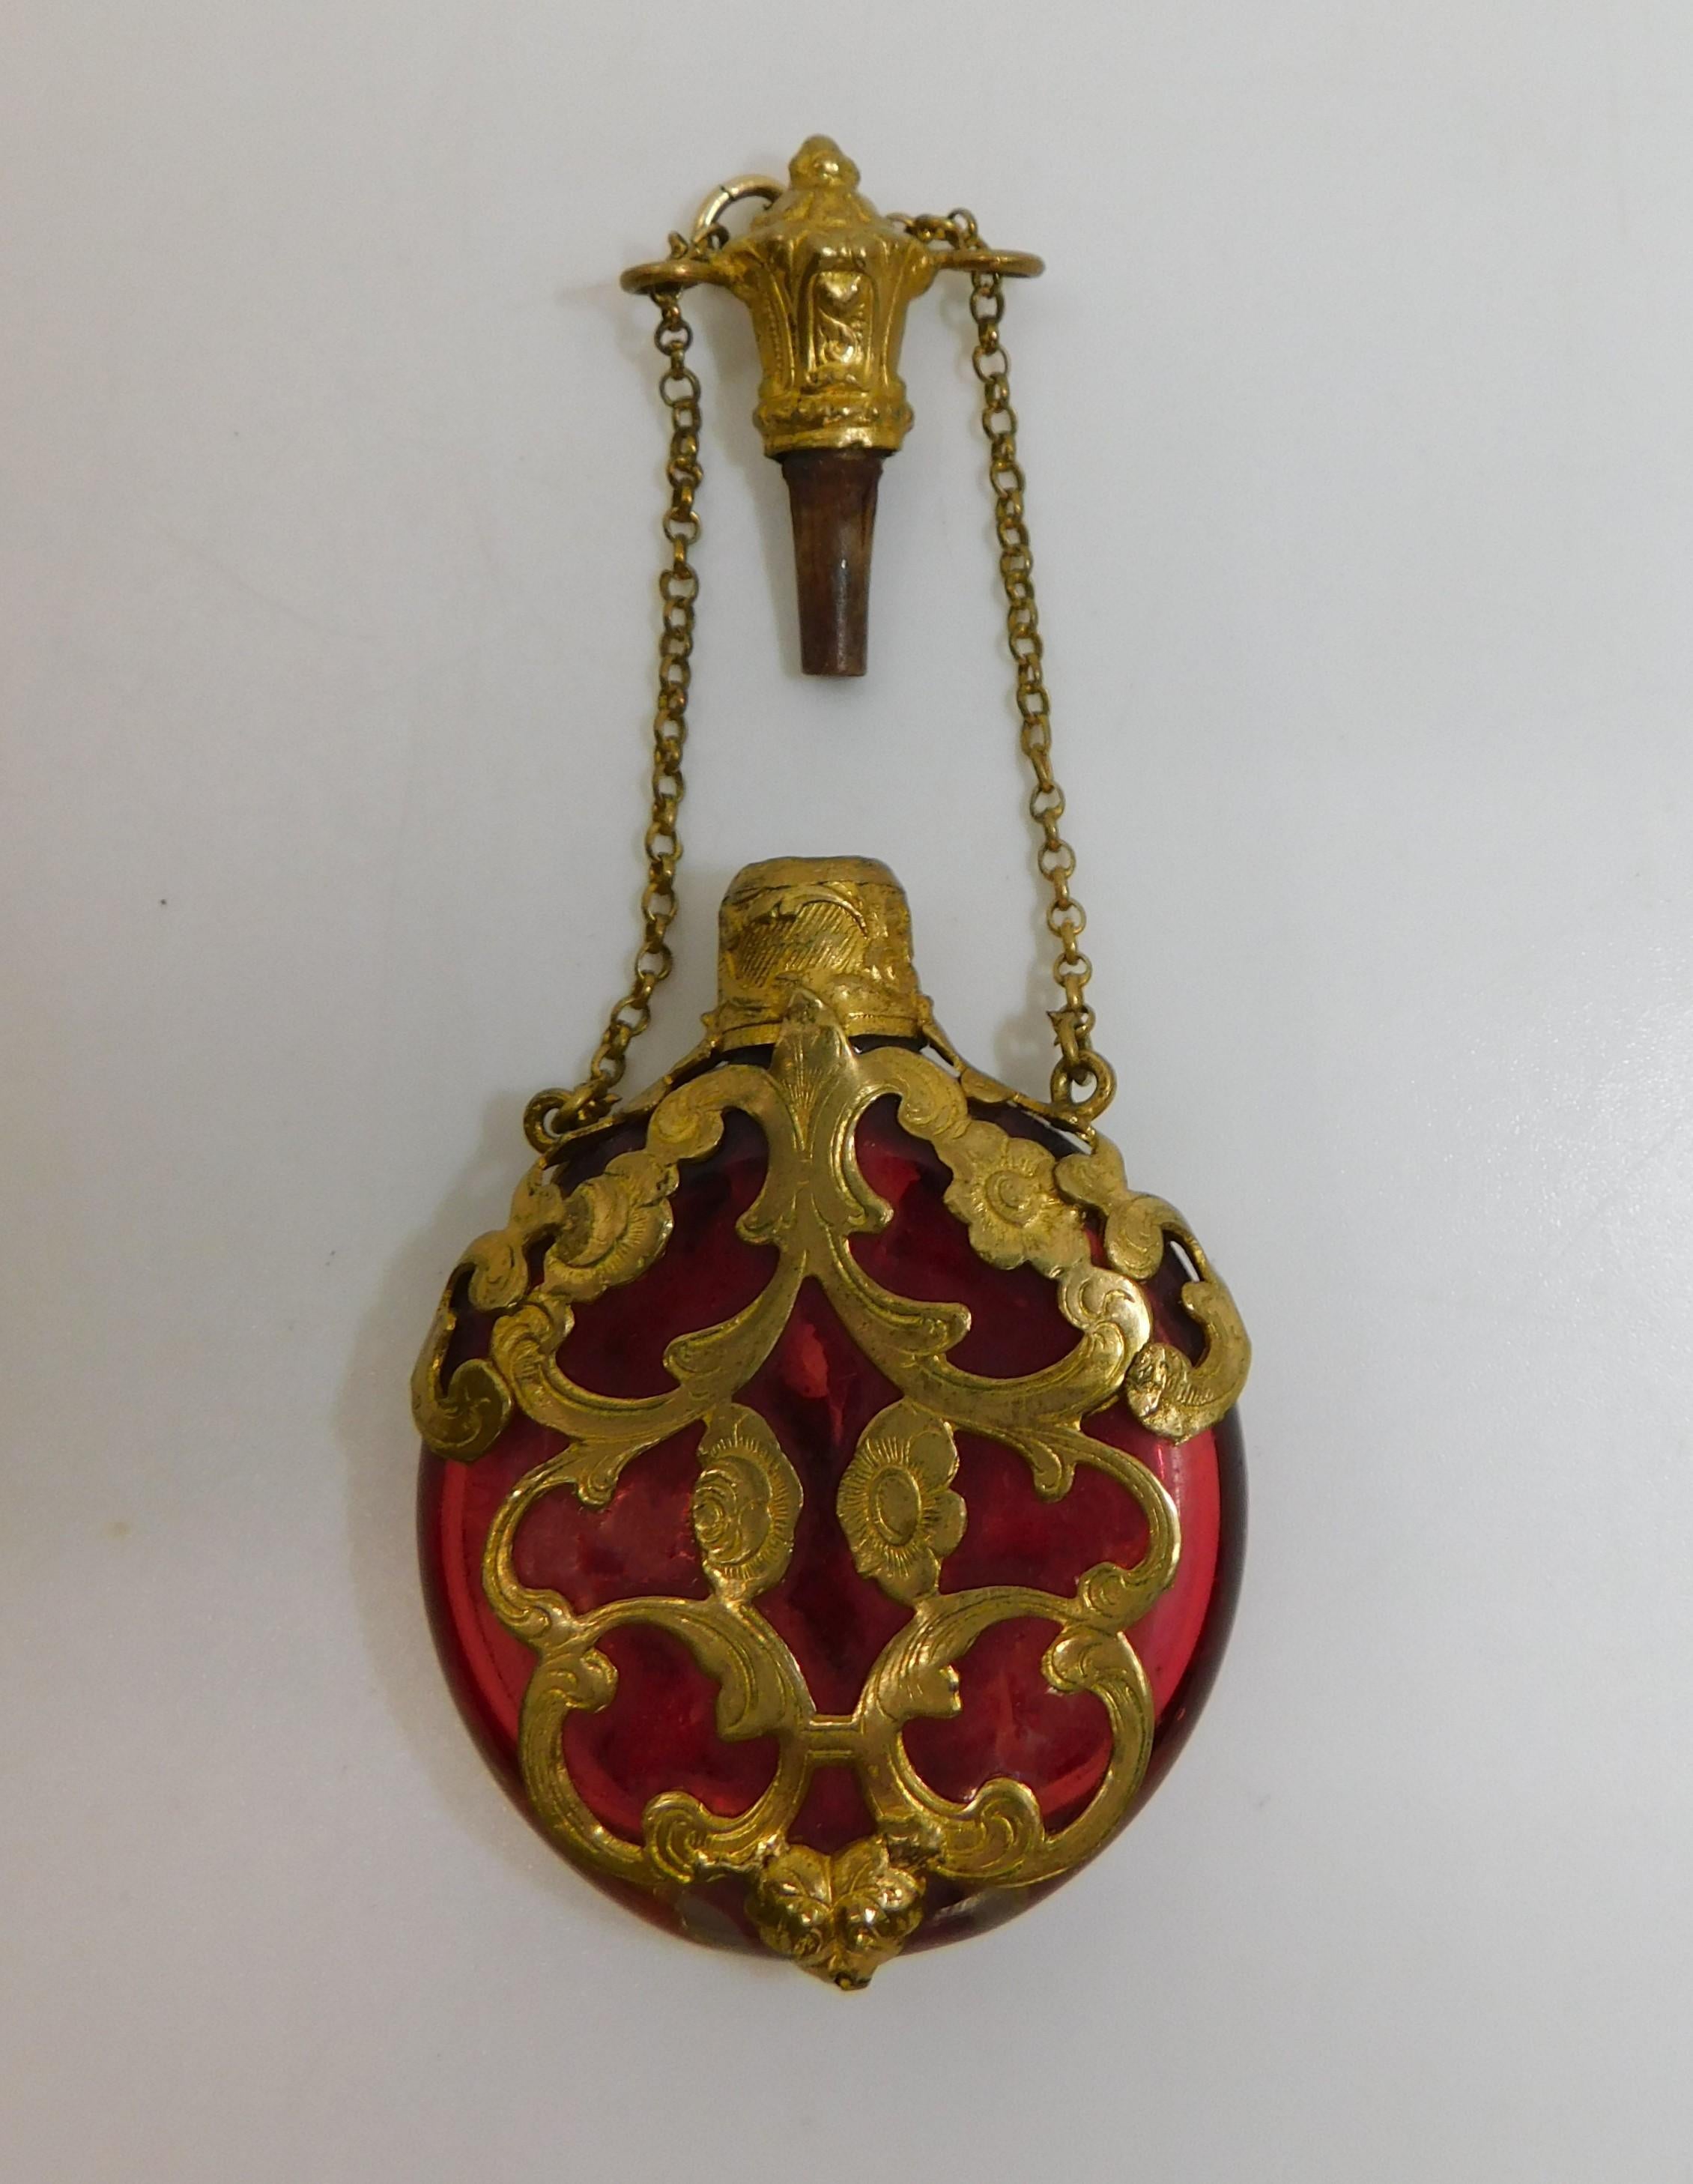 Antique Cranberry Glass Chatelaine Perfume Bottle with Gold Filigree Circa 1880 In Good Condition For Sale In Hamilton, Ontario